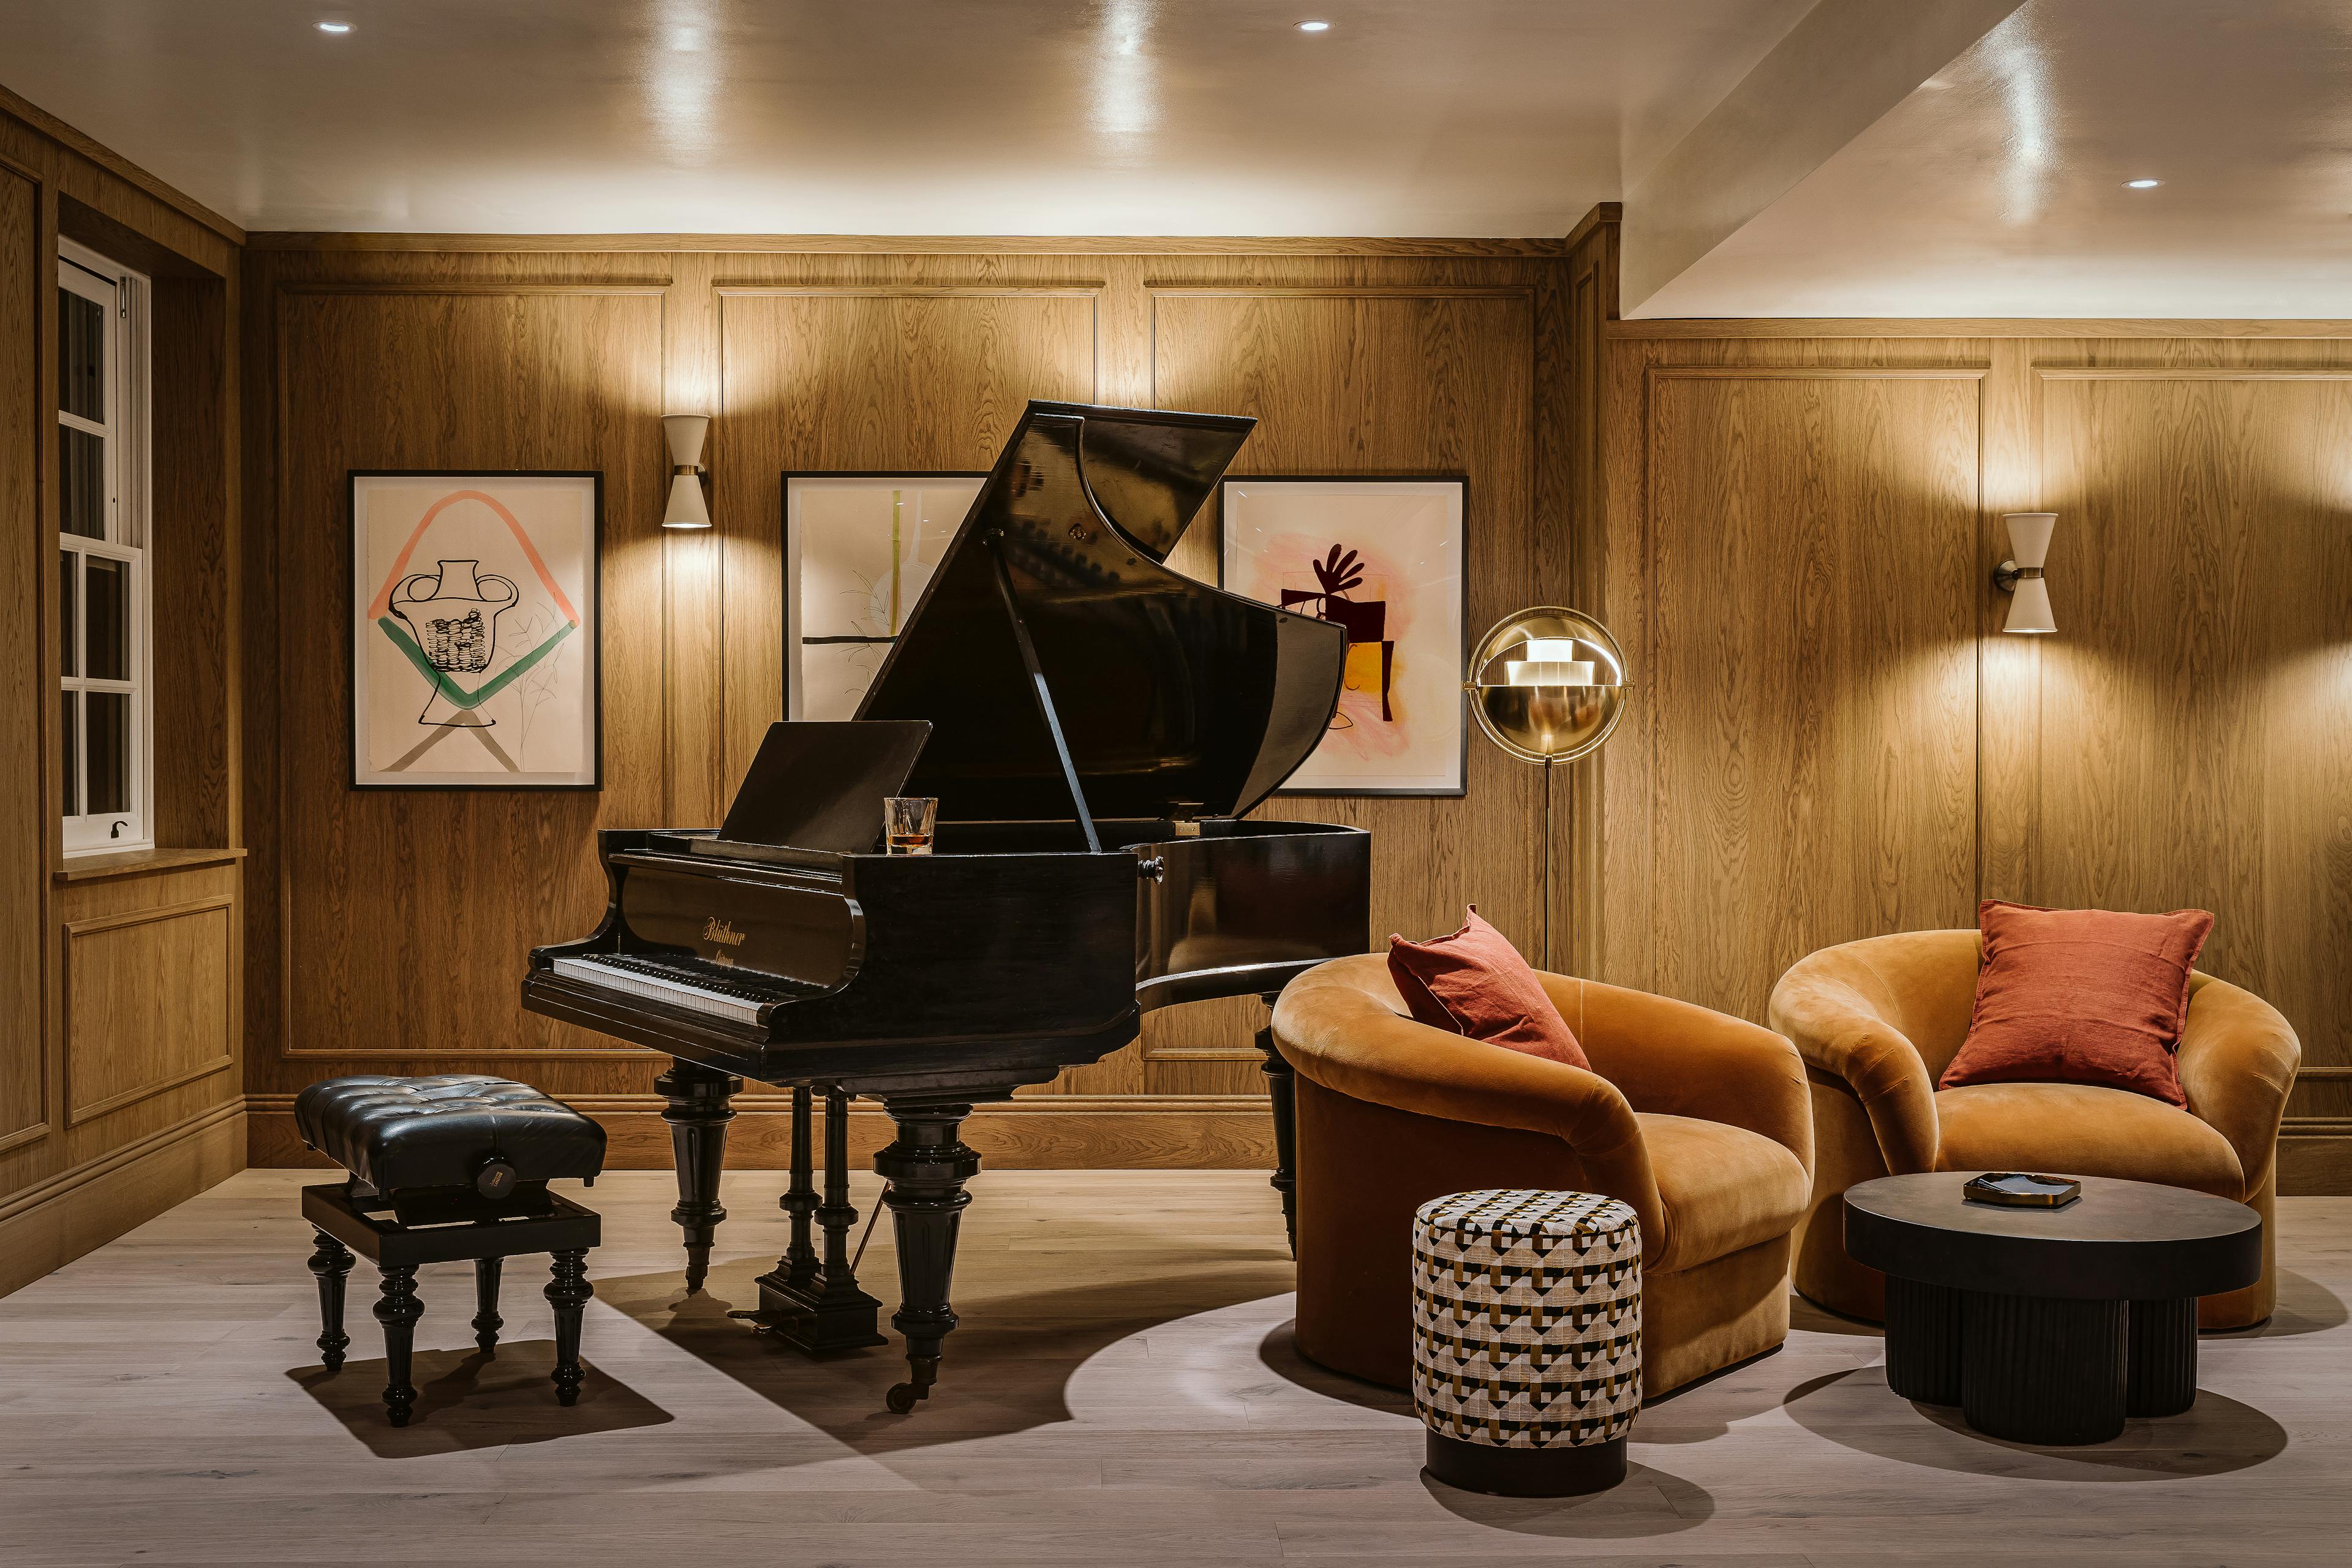 A row of three framed abstract drawings by artist Vicki Sher installed on wood panel wall behind a baby grand piano at the Chief London clubhouse.